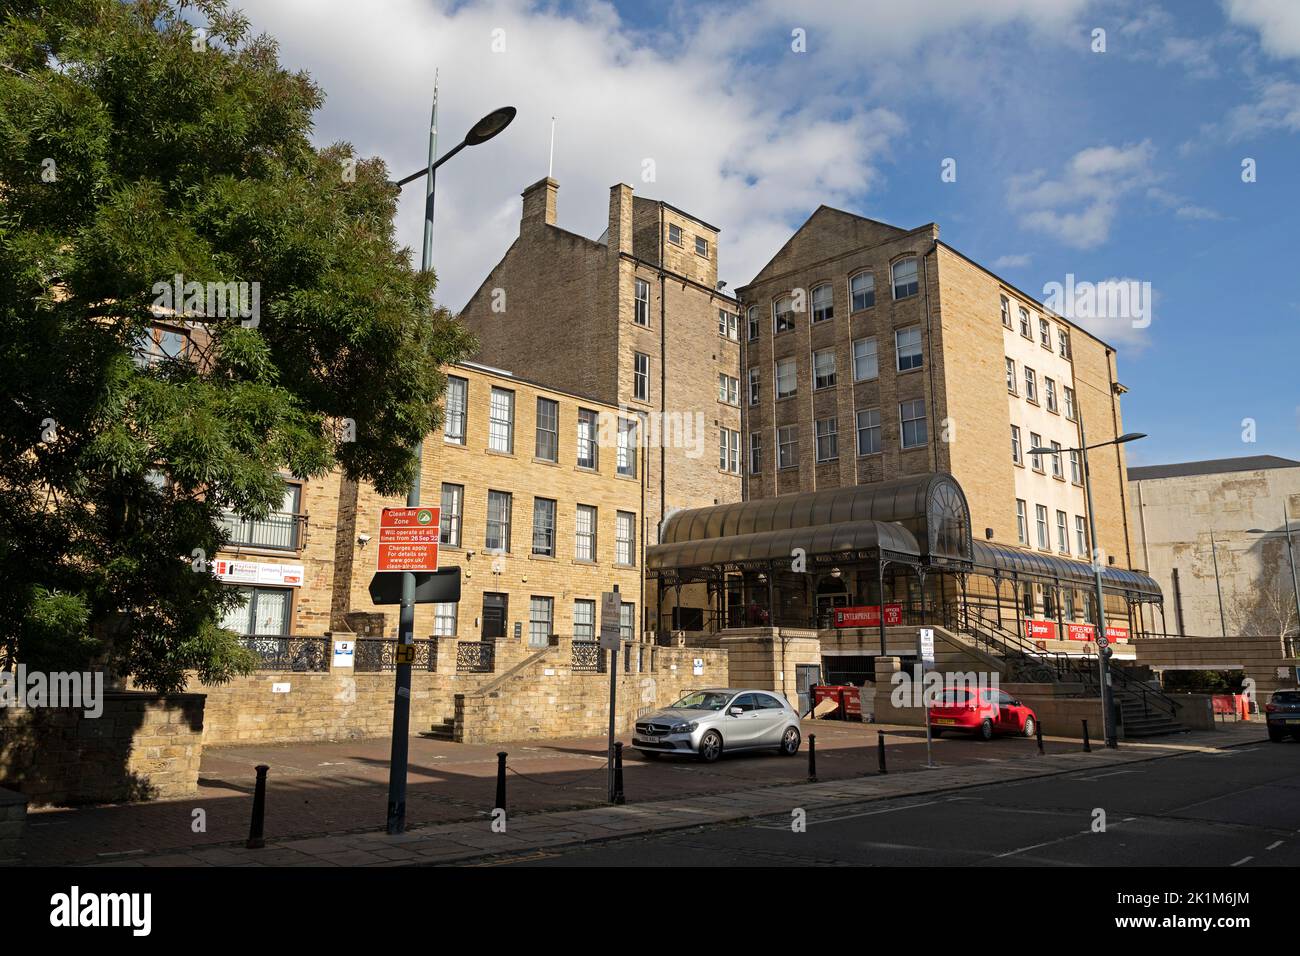 The Enterprise Hub in the Little Germany district of Bradford, West Yorkshire. Stock Photo